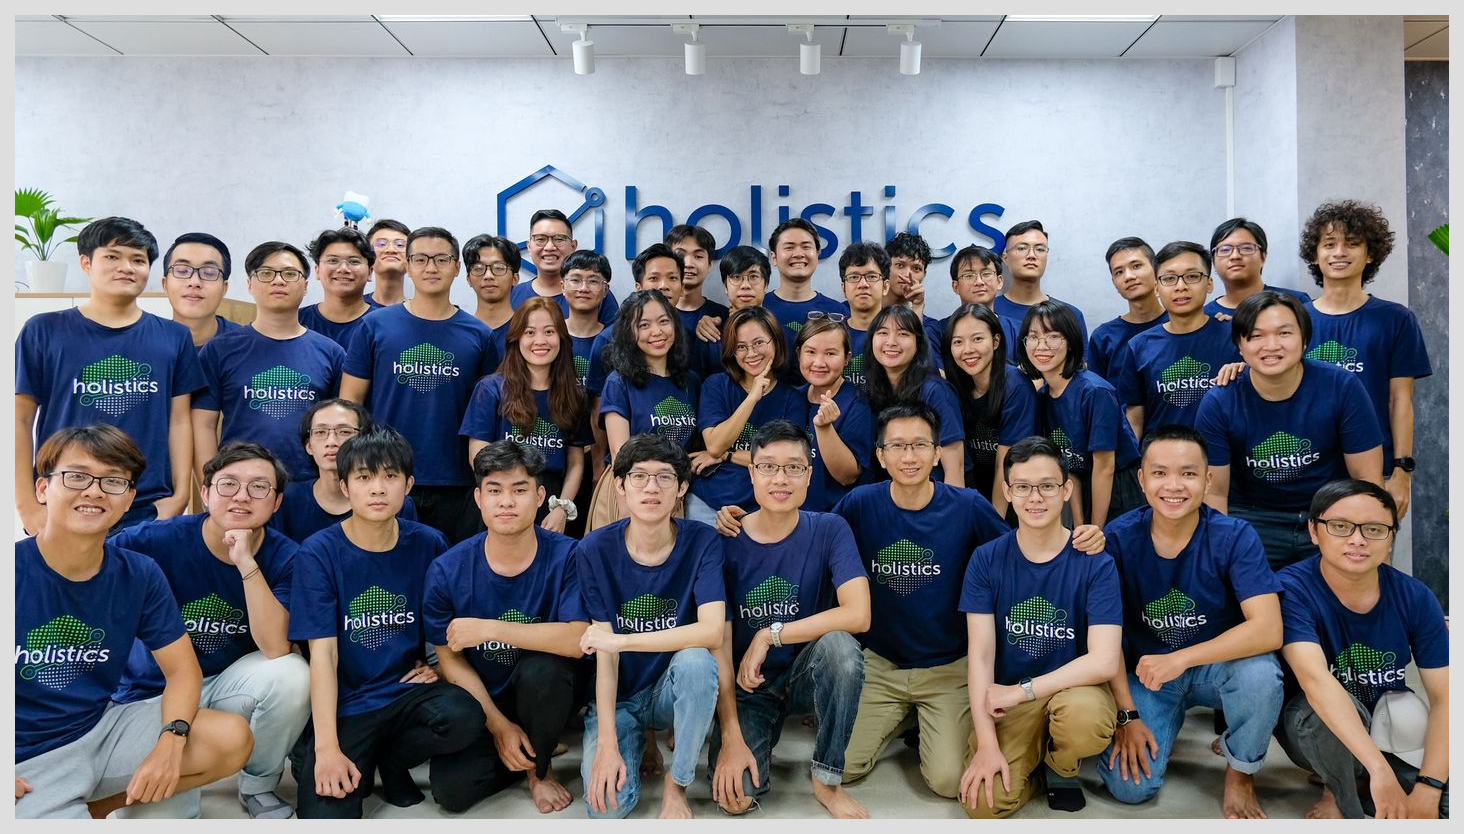 Holistics team members in front of the Holistics sign